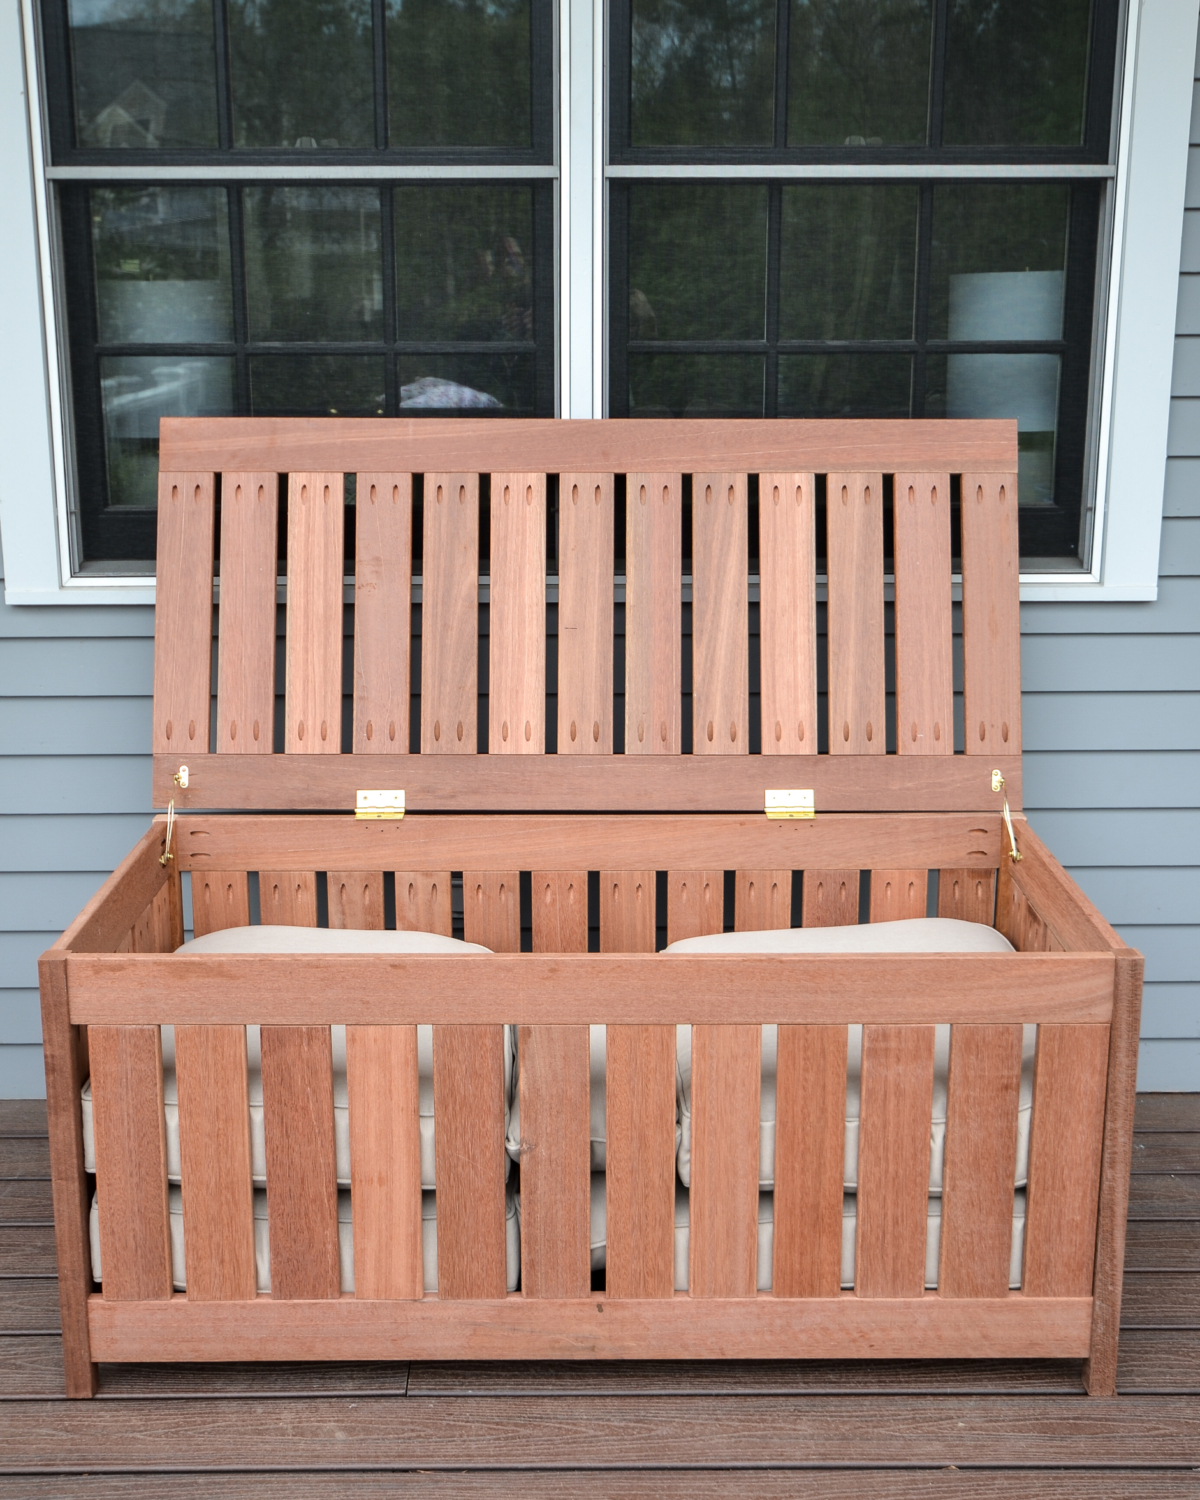 FREE plans for making a DIY outdoor storage box for outdoor cushions! Plus, it doubles as an outdoor bench seat and serving surface.